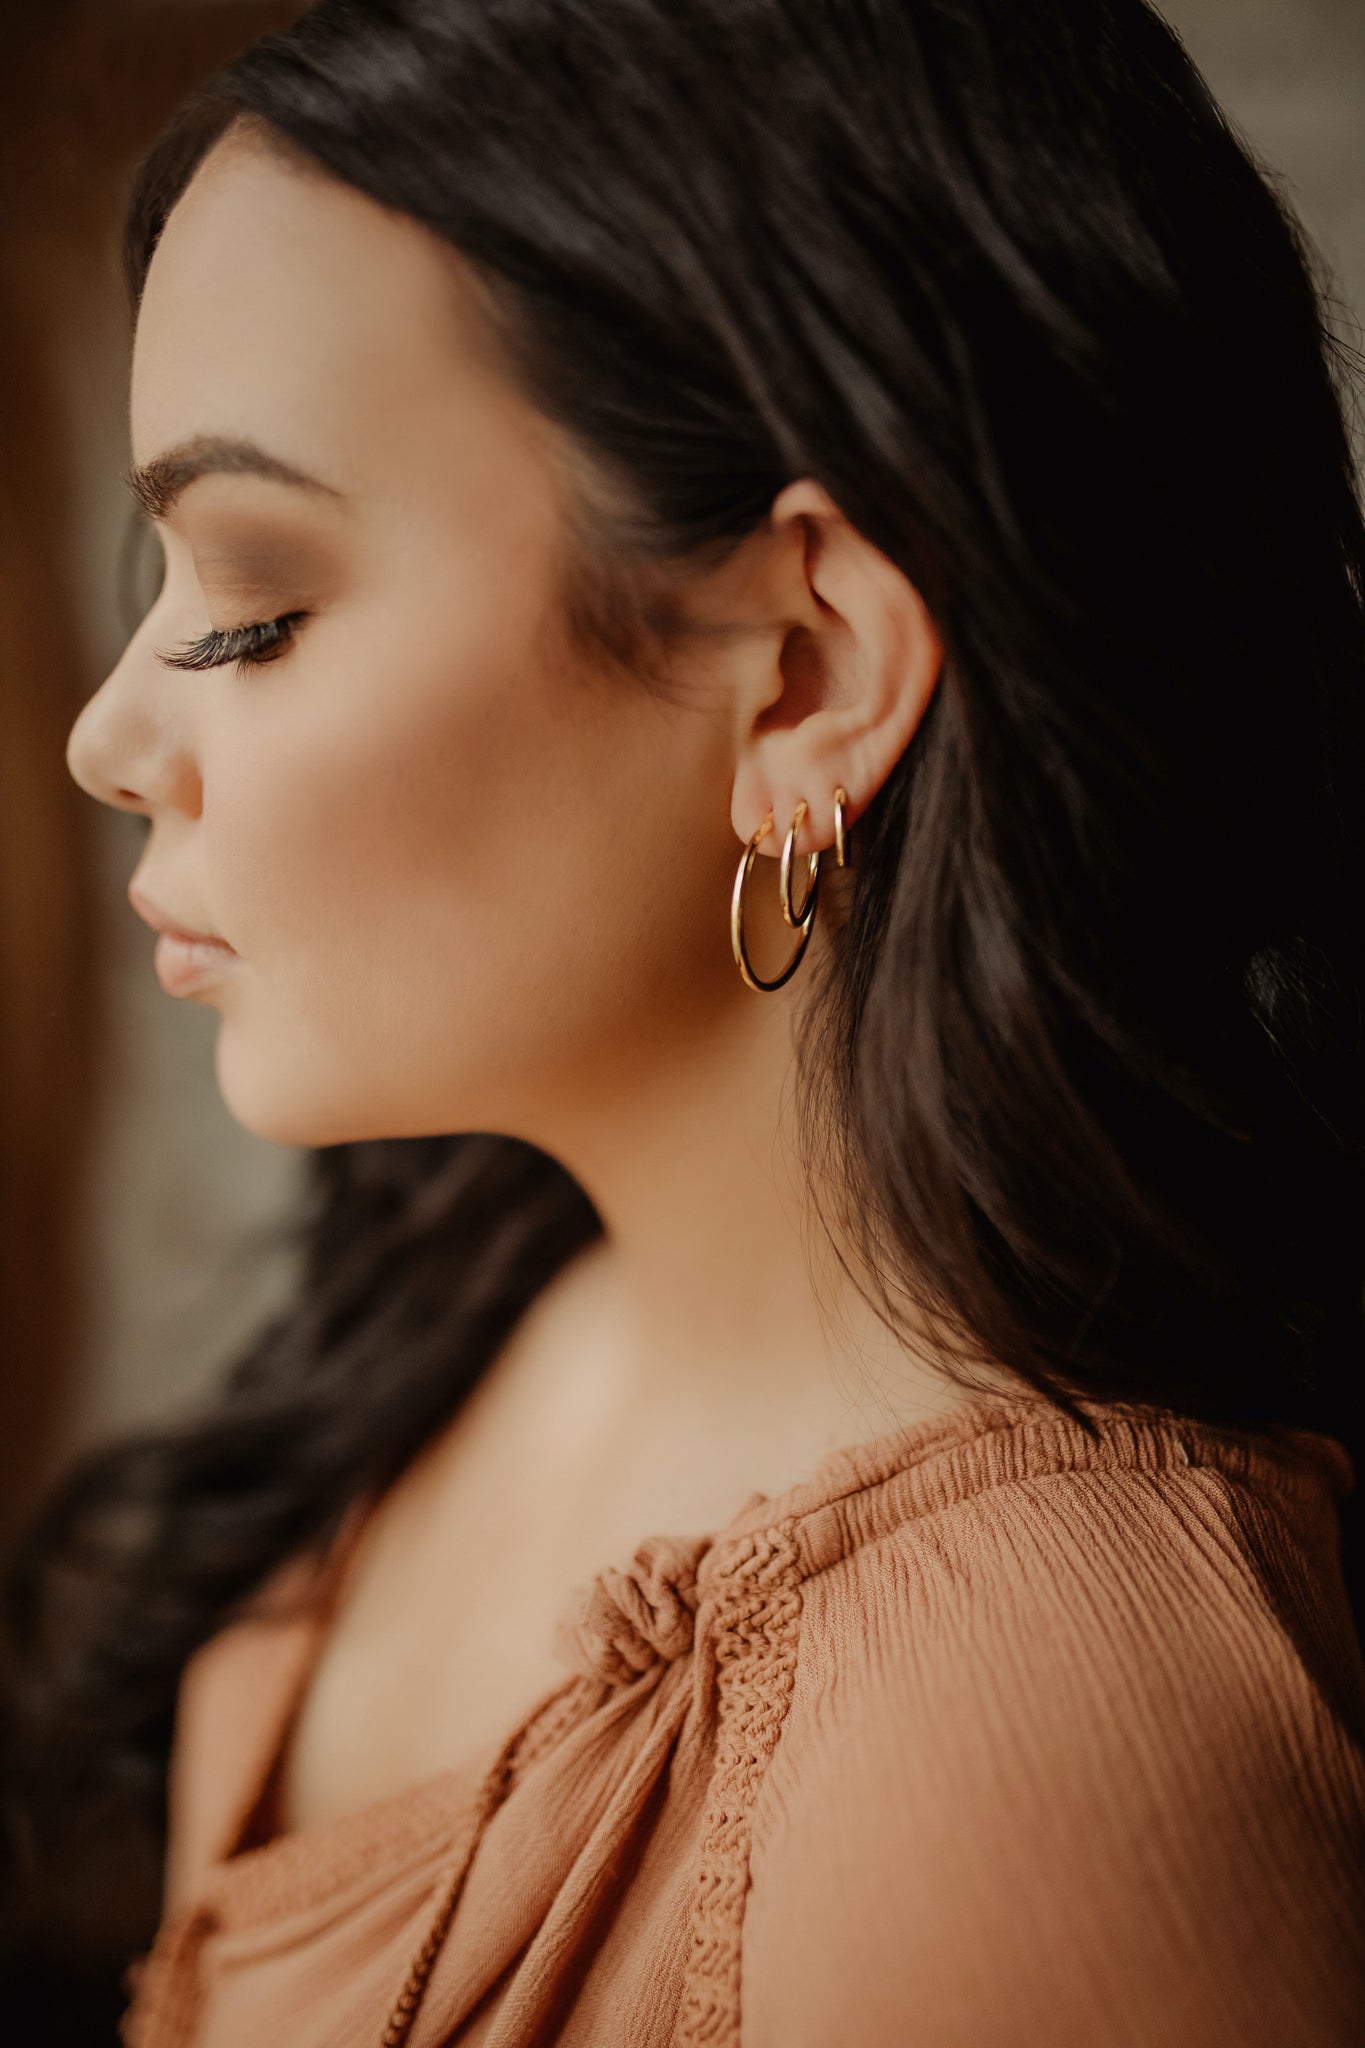 Woman standing sideways wearing small hoop earring and other sizes of hoops